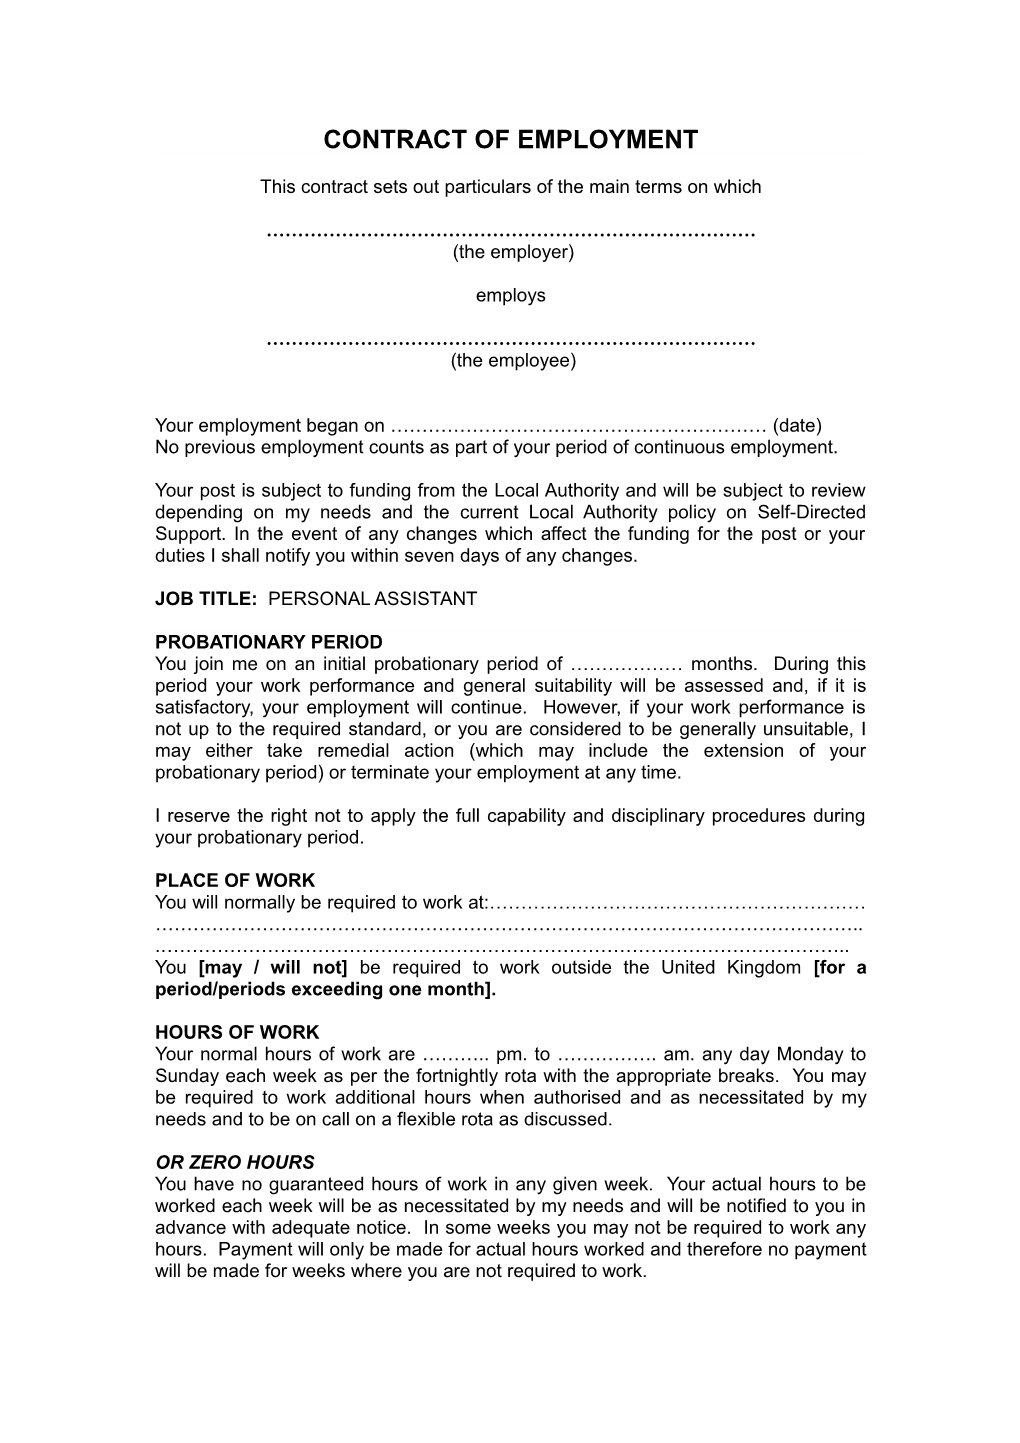 Contract of Employment s2